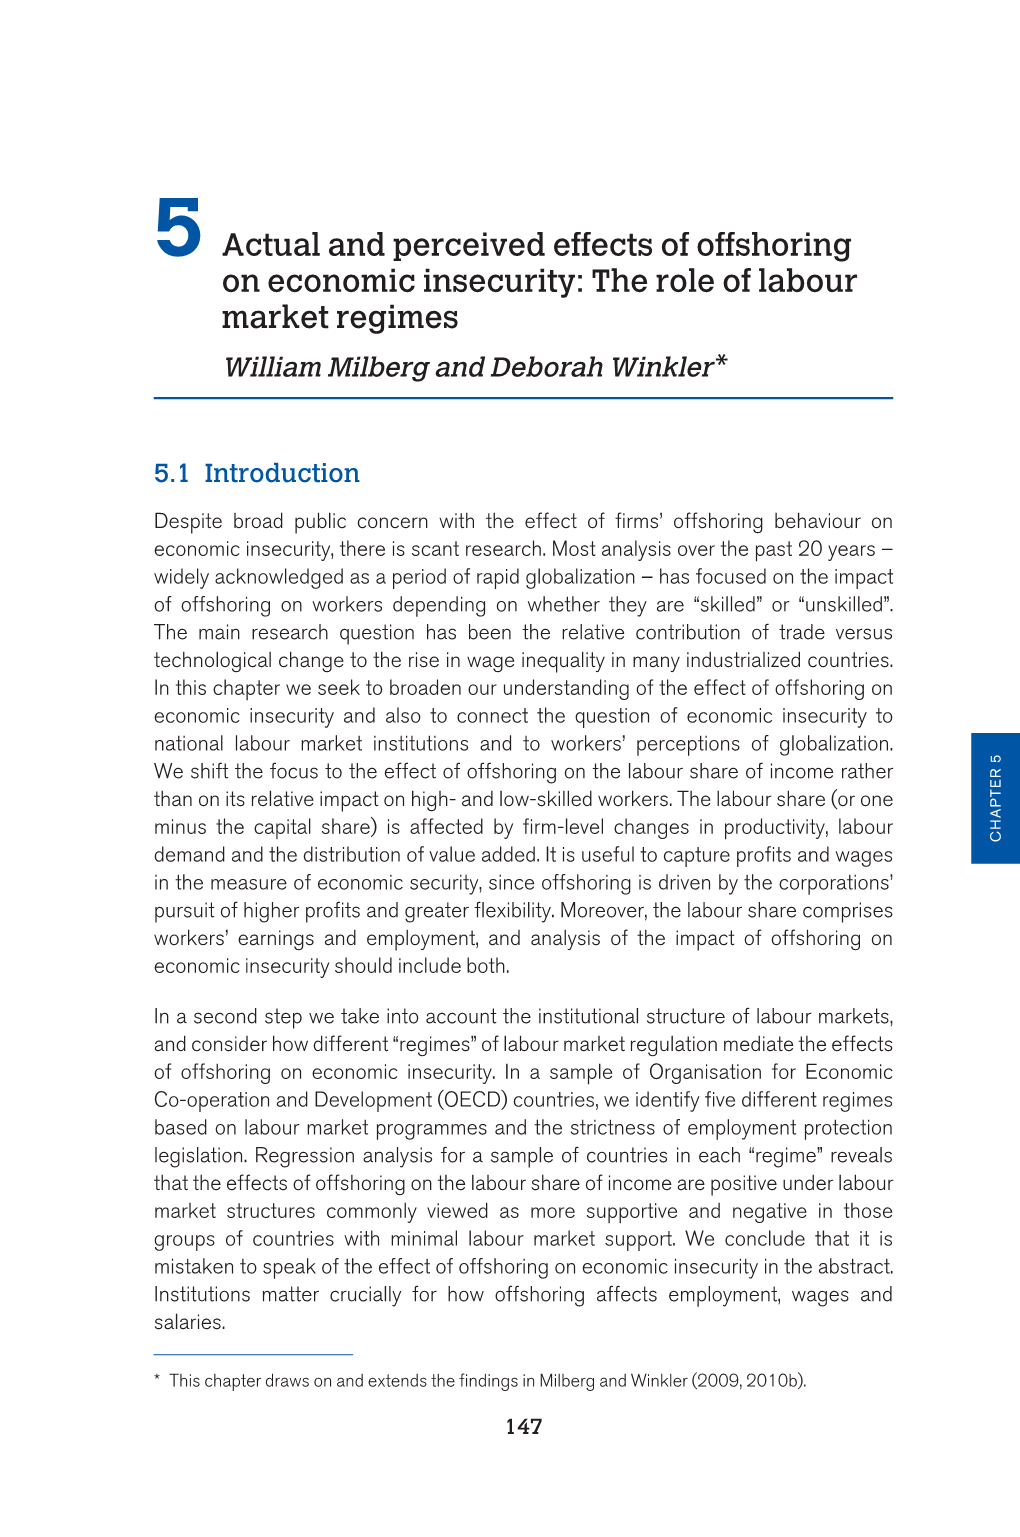 Actual and Perceived Effects of Offshoring on Economic Insecurity: the Role of Labour Market Regimes